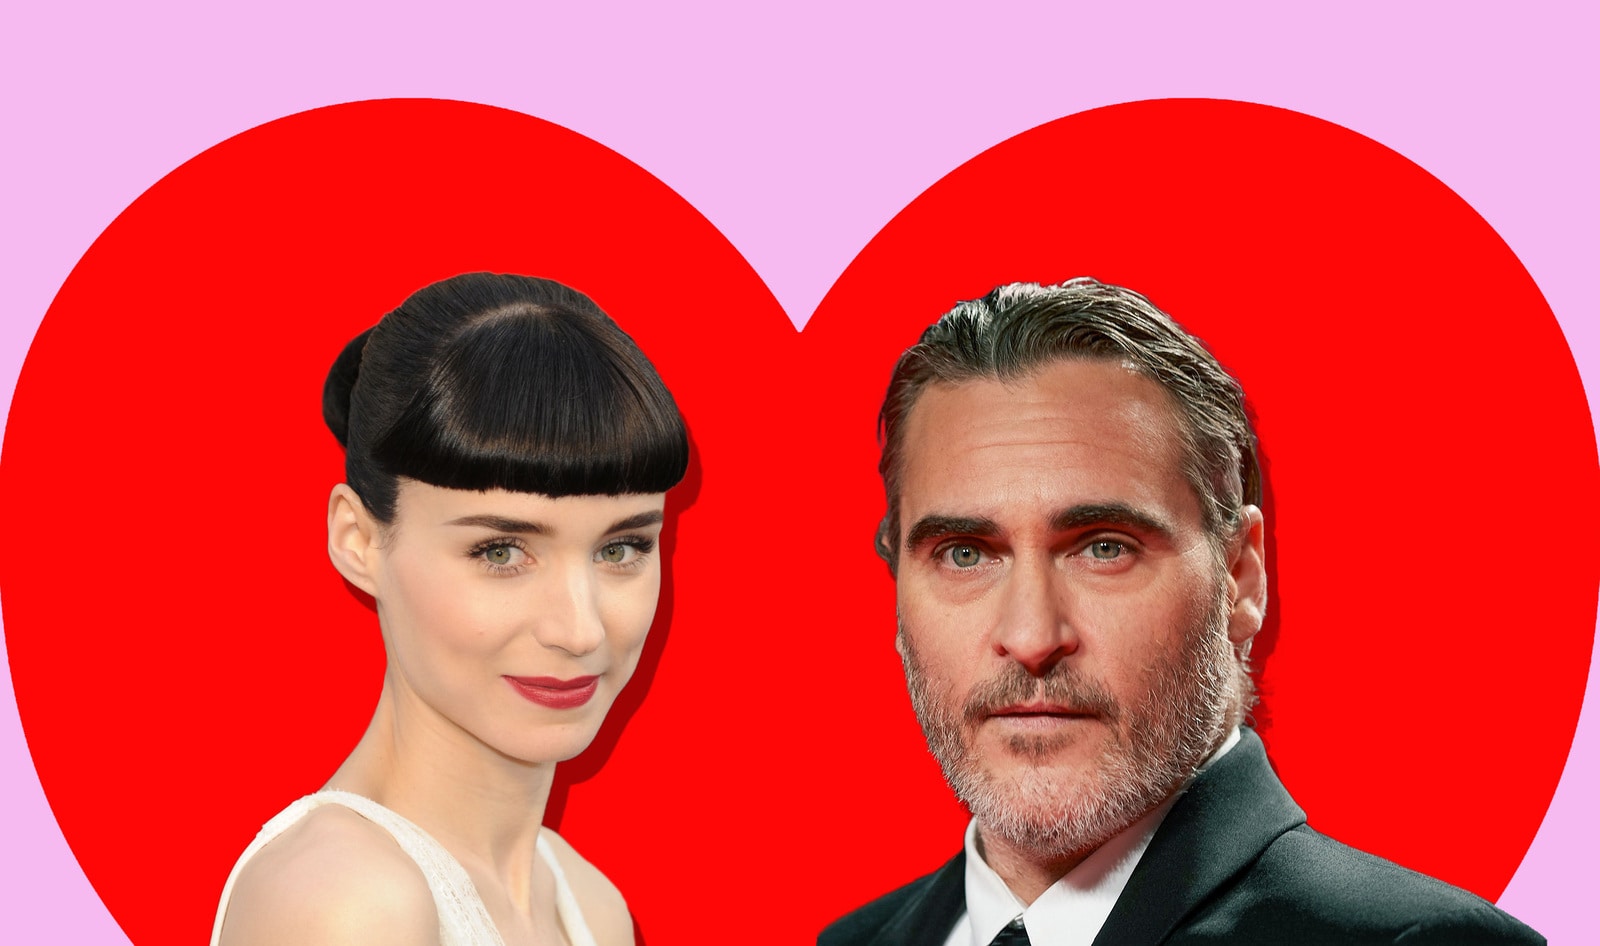 Joaquin Phoenix and Rooney Mara Join Beyond Meat to Give Out One Million Vegan Burgers to Communities in Need